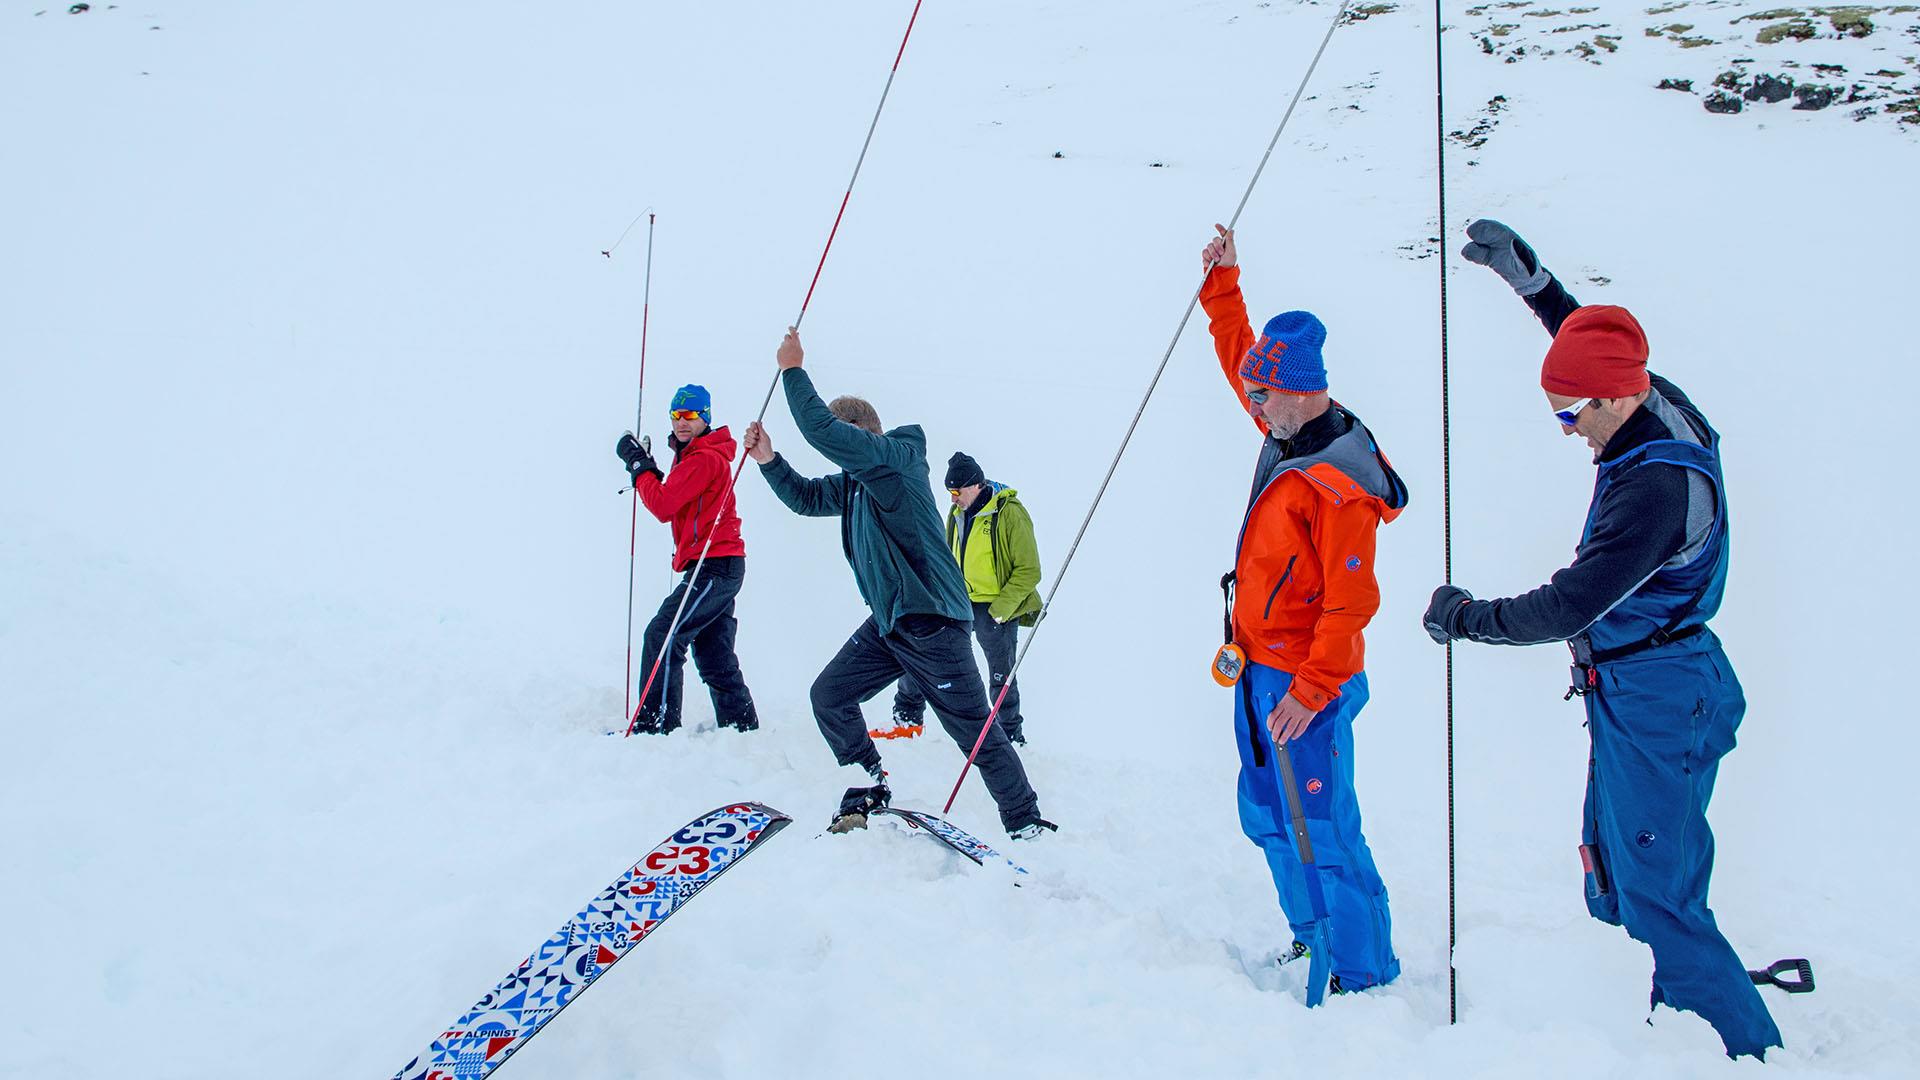 During an avalanche course where the participants learn to use an avalanche probe